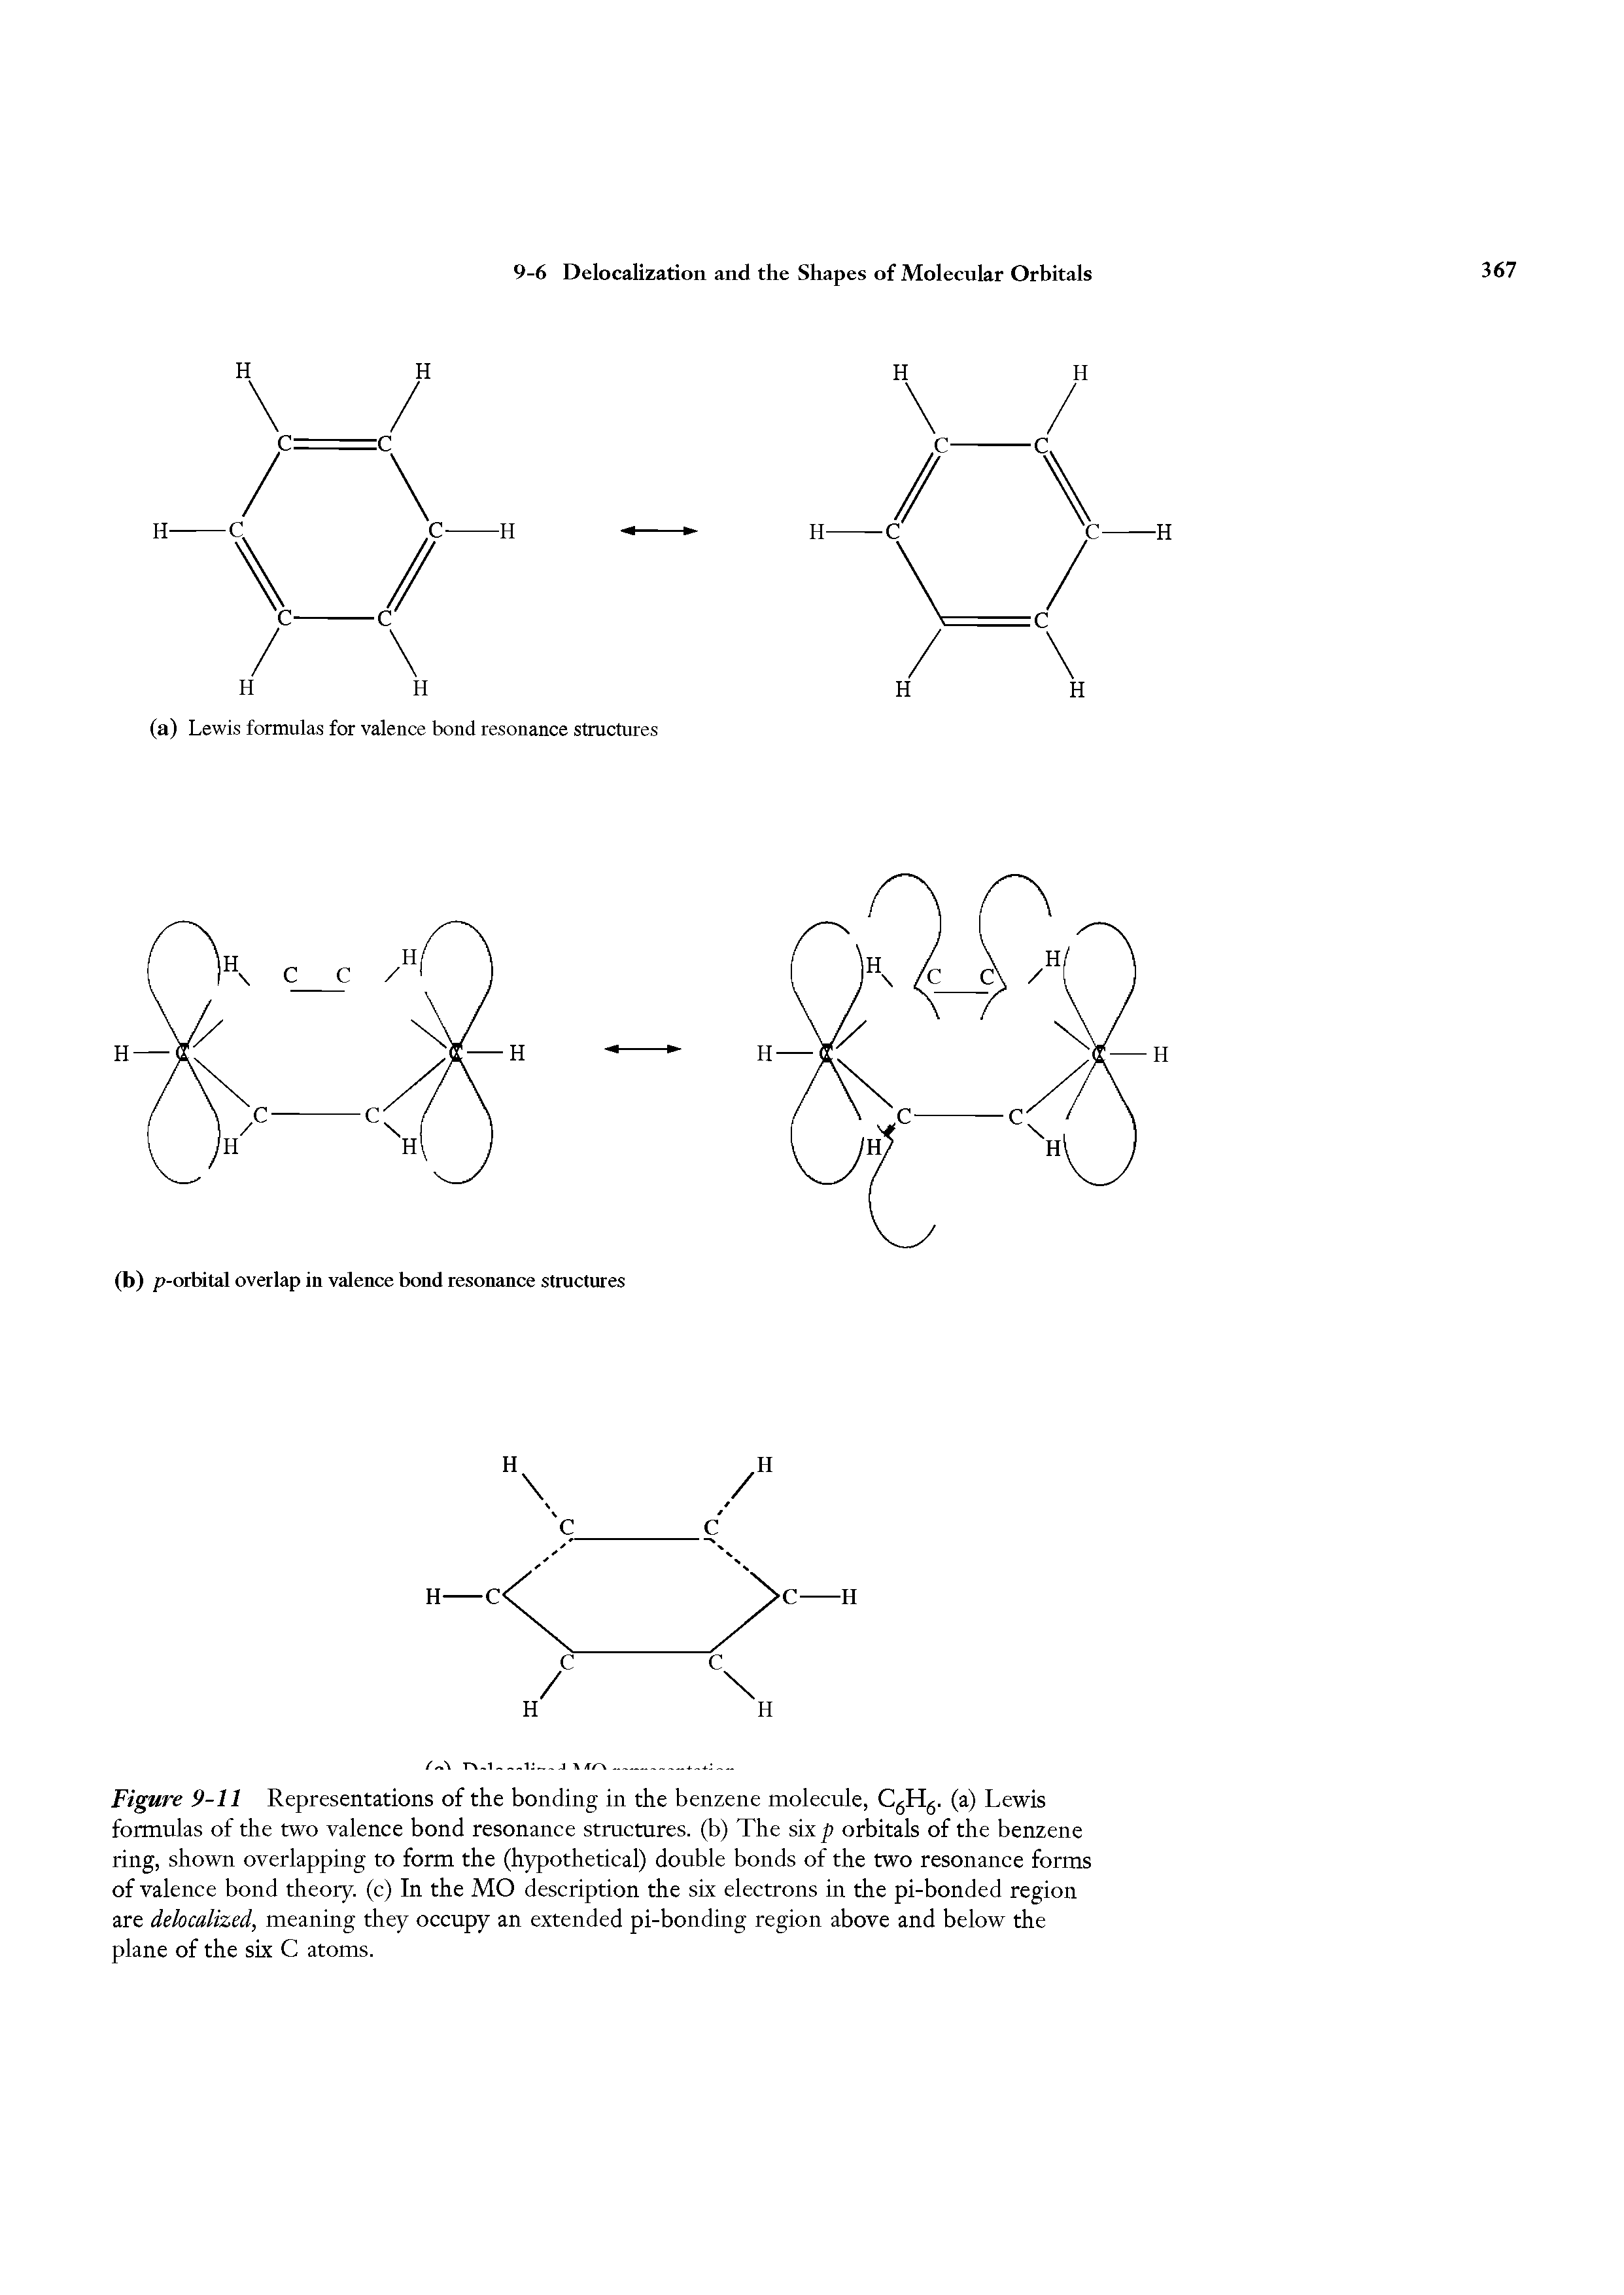 Figure 9-11 Representations of the bonding in the benzene molecule, CgHg. (a) Lewis formulas of the two valence bond resonance structures, (b) The six p orbitals of the benzene ring, shown overlapping to form the (hypothetical) double bonds of the two resonance forms of valence bond theory, (c) In the MO description the six electrons in the pi-bonded region are dehcalized, meaning they occupy an extended pi-bonding region above and below the plane of the six C atoms.